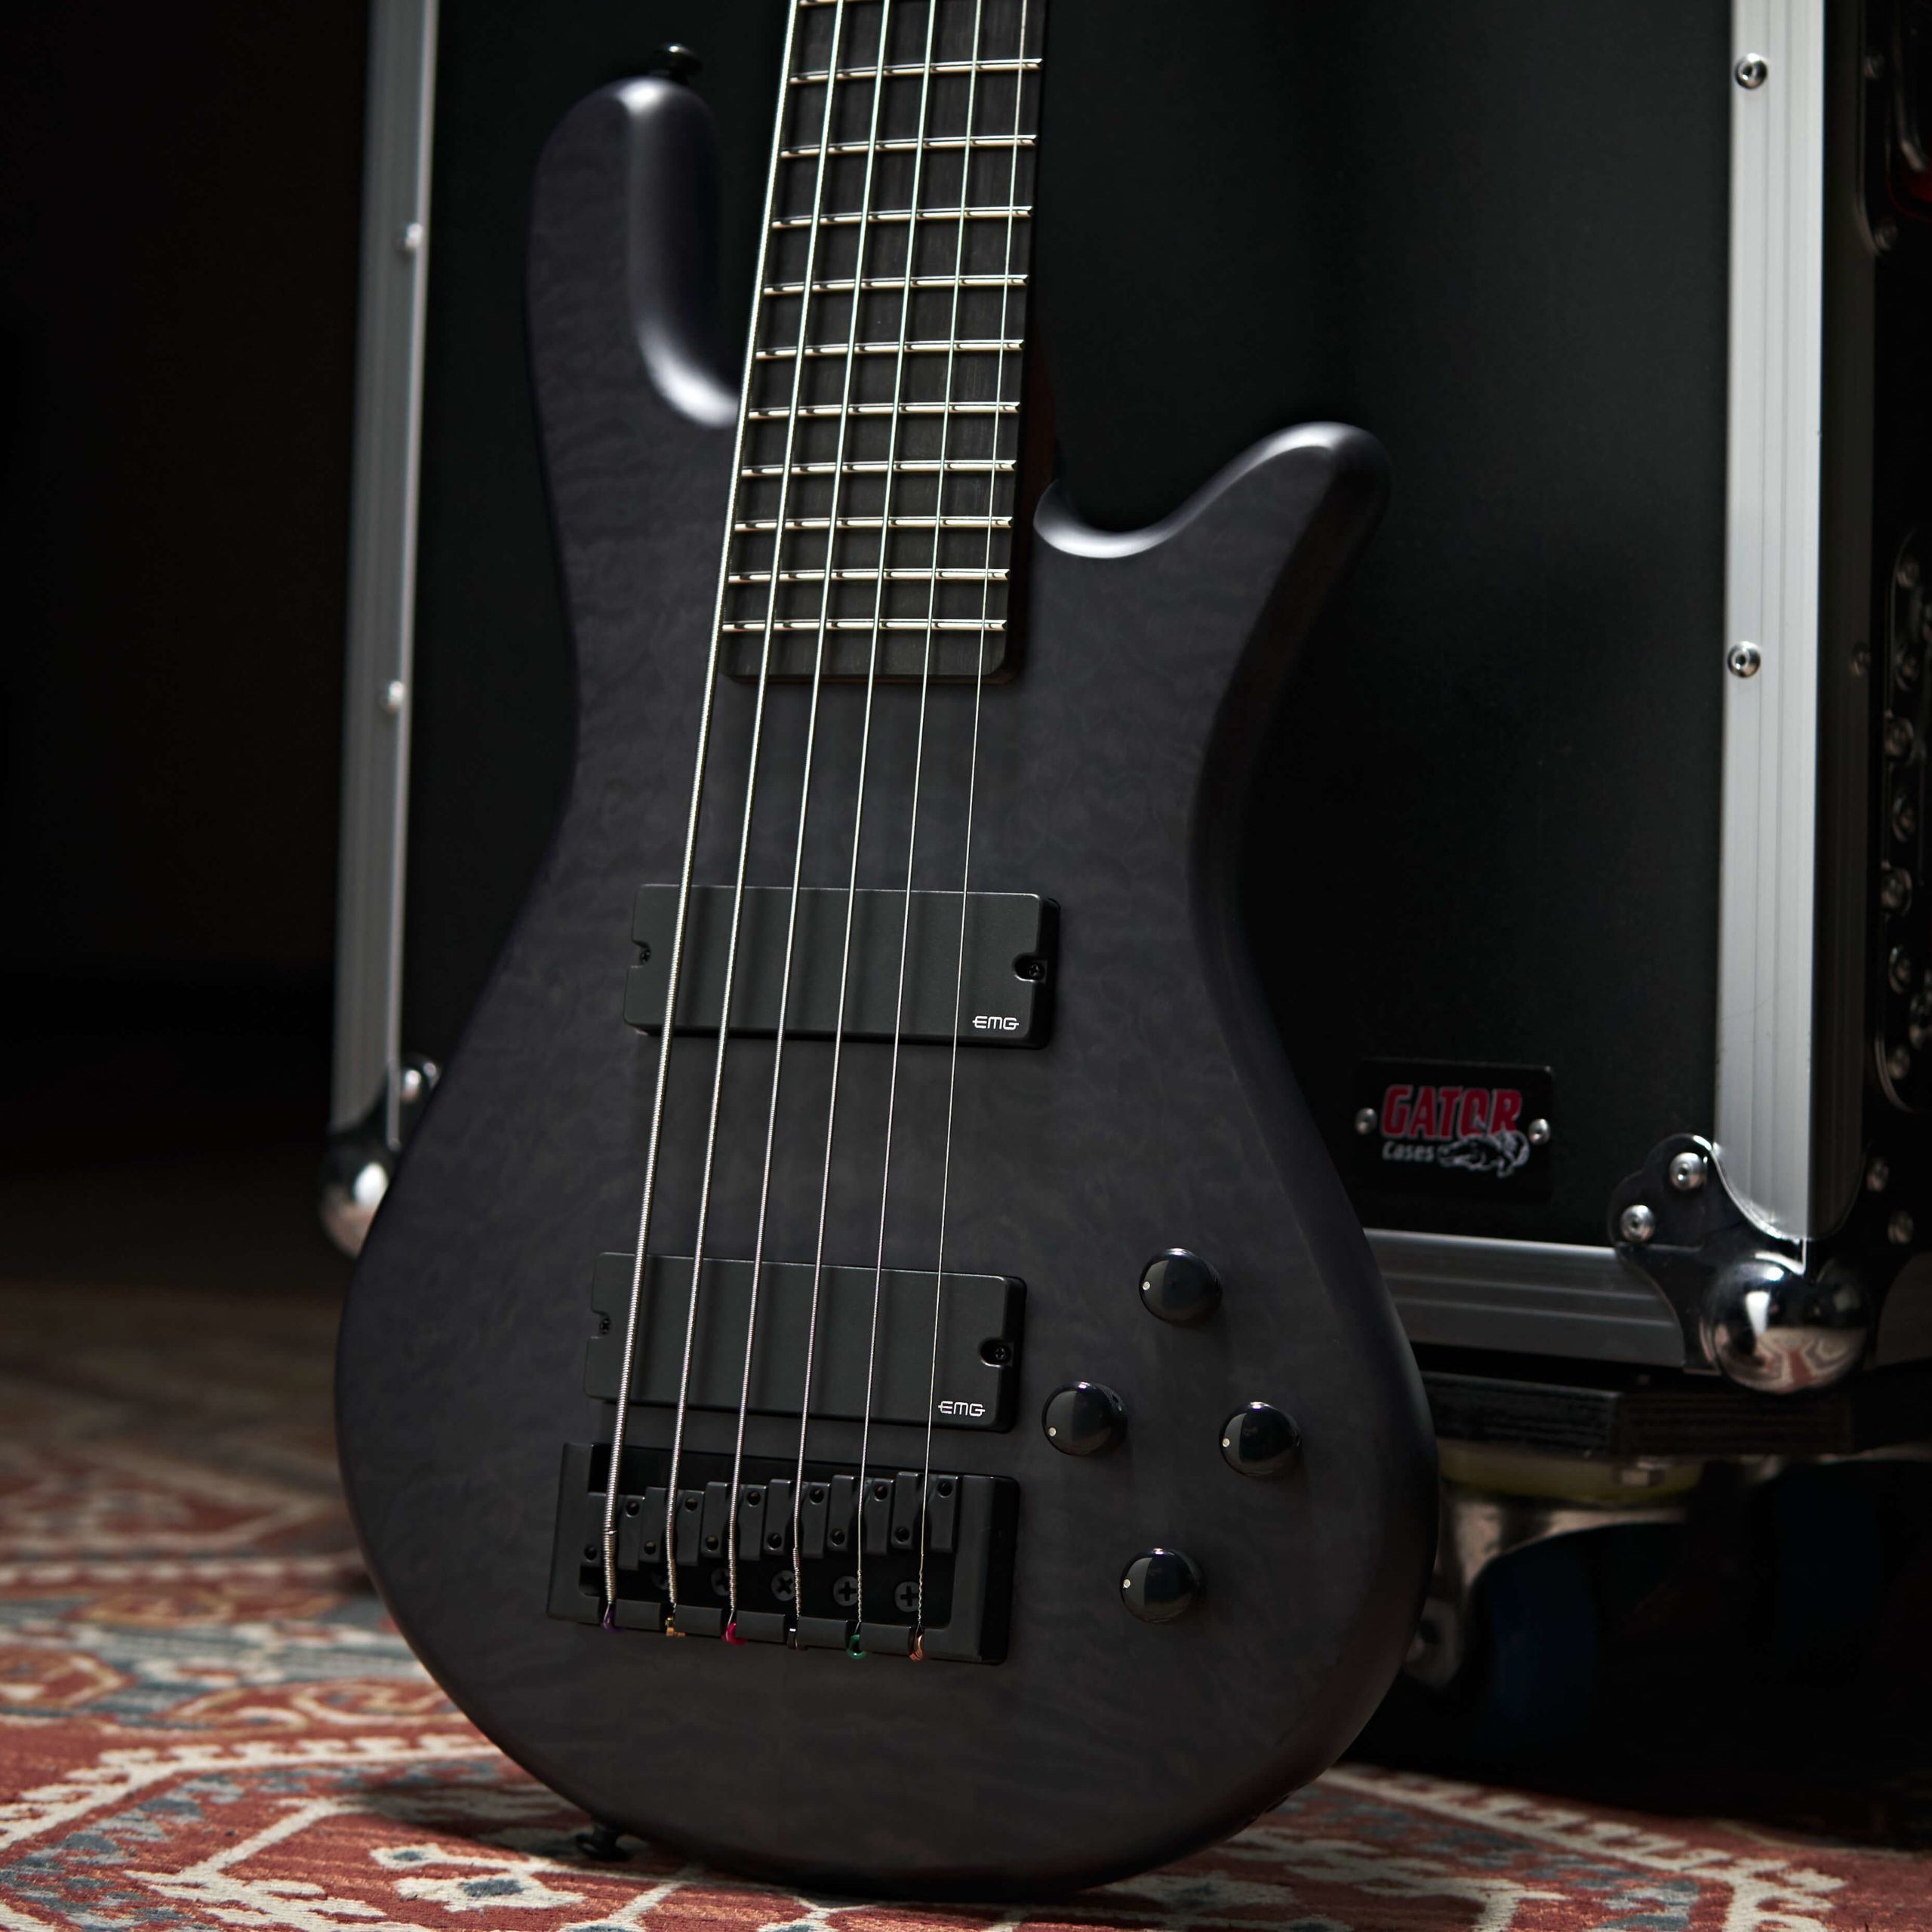 Spector Ns Pulse Ii 6c Active Emg Eb - Black Stain Matte - Solid body electric bass - Variation 3